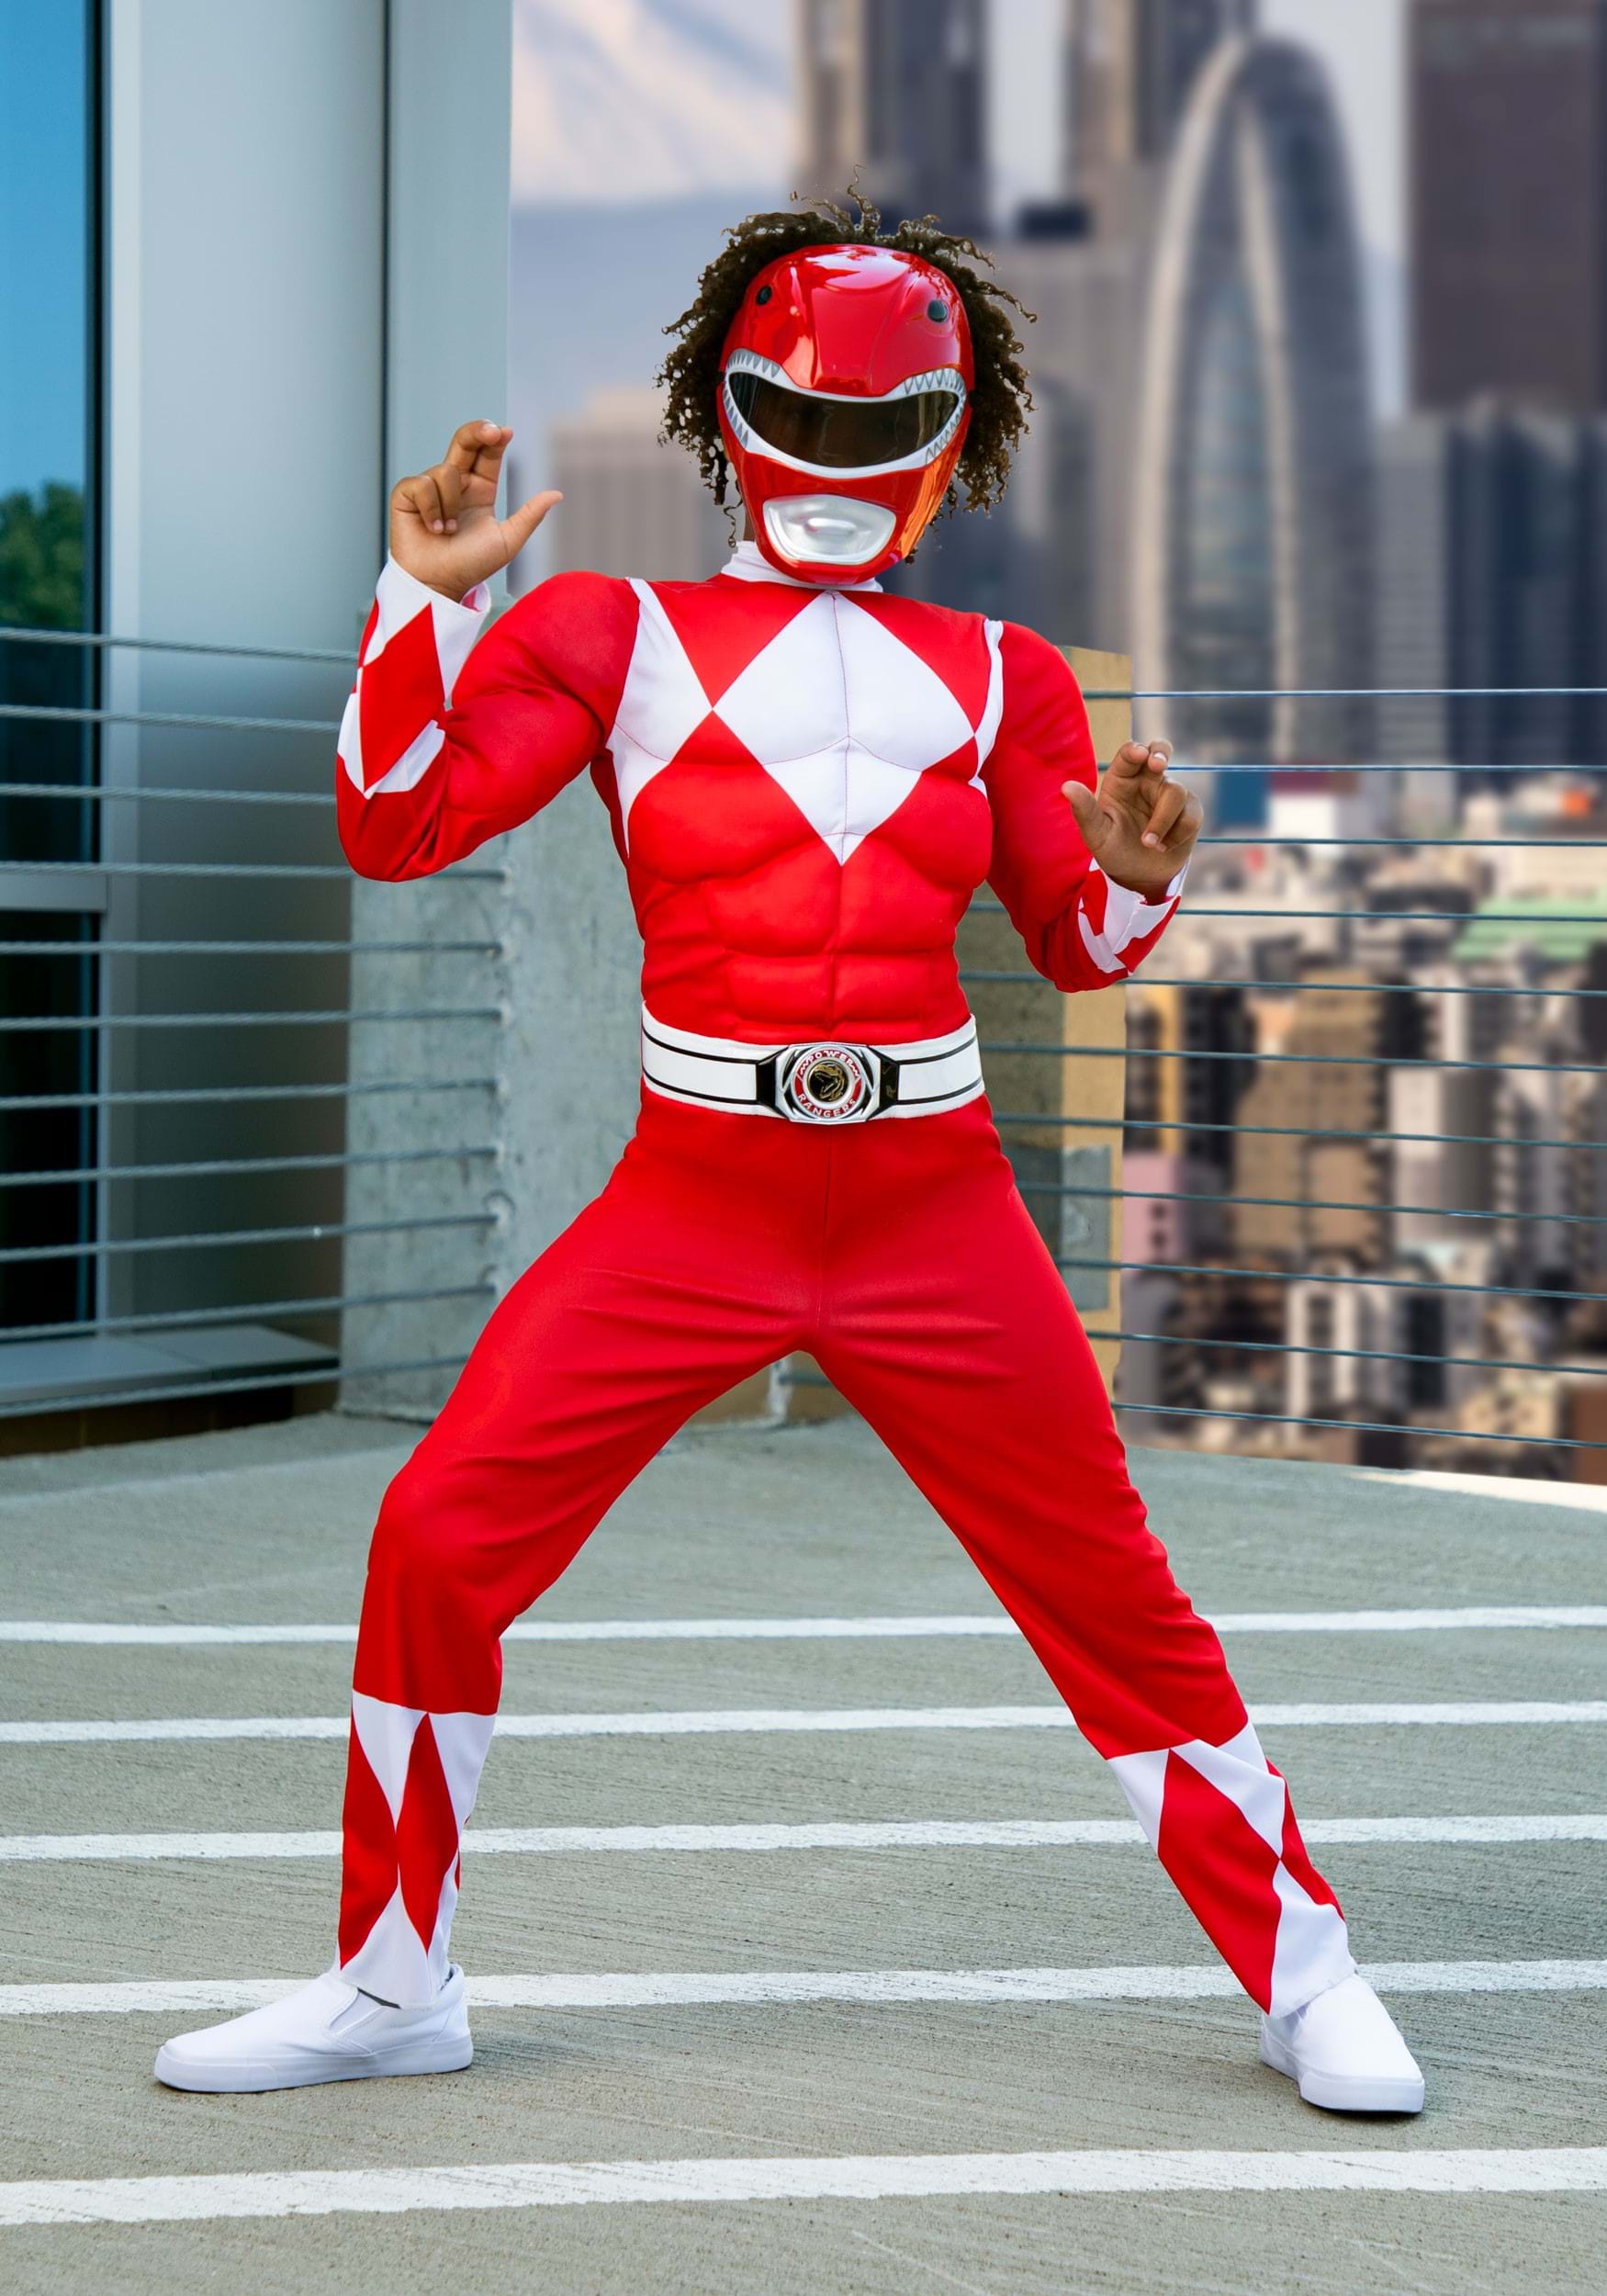 https://images.fun.com/products/68832/1-1/power-rangers-boys-red-ranger-costume.jpg